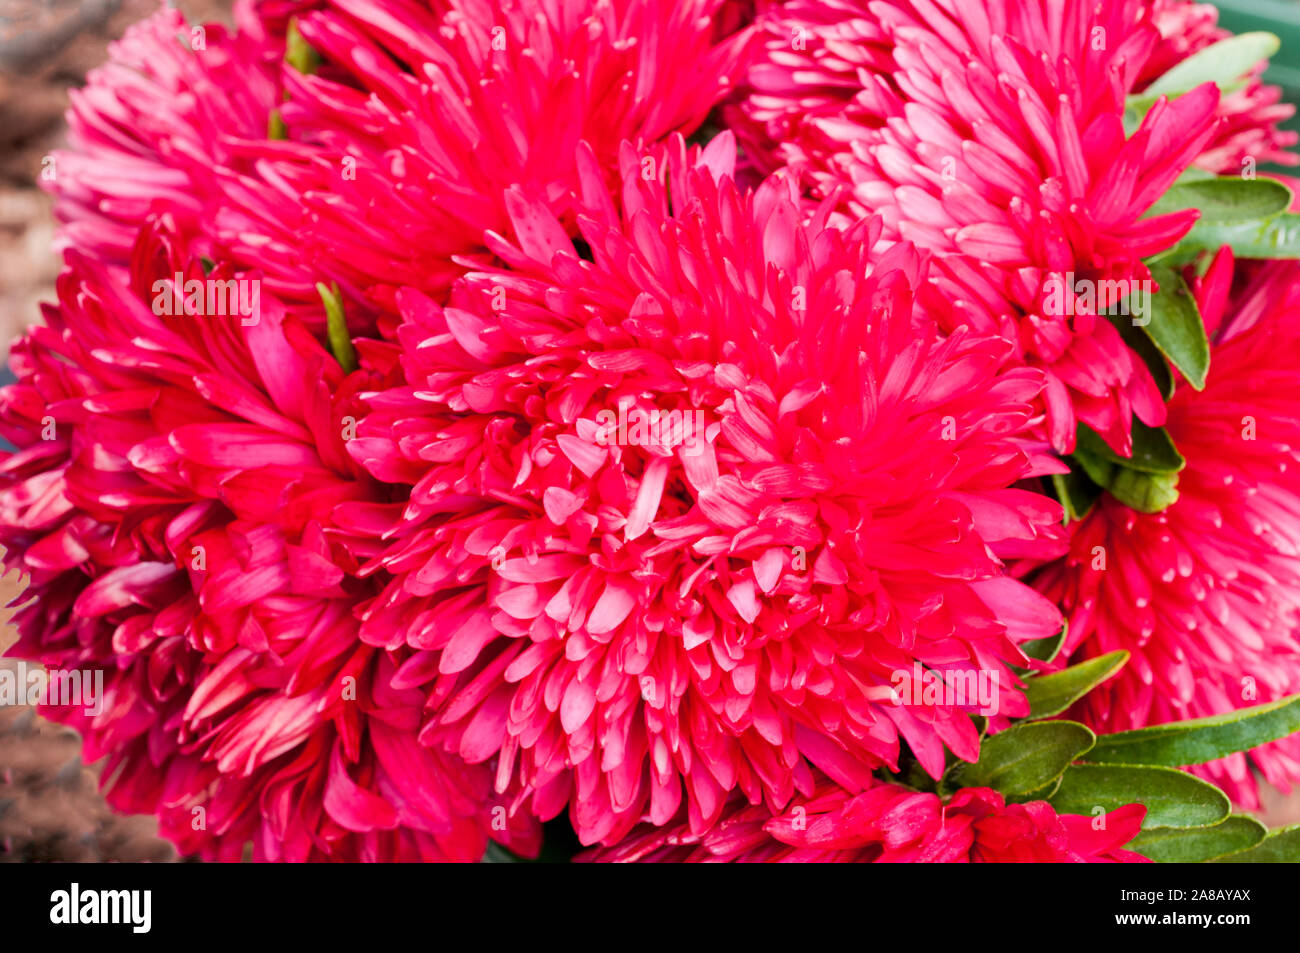 Close up of Aster flower head Red Gala series  A variety of the fully double pincushion type  An annual that is ideal as a cut flower.. Stock Photo